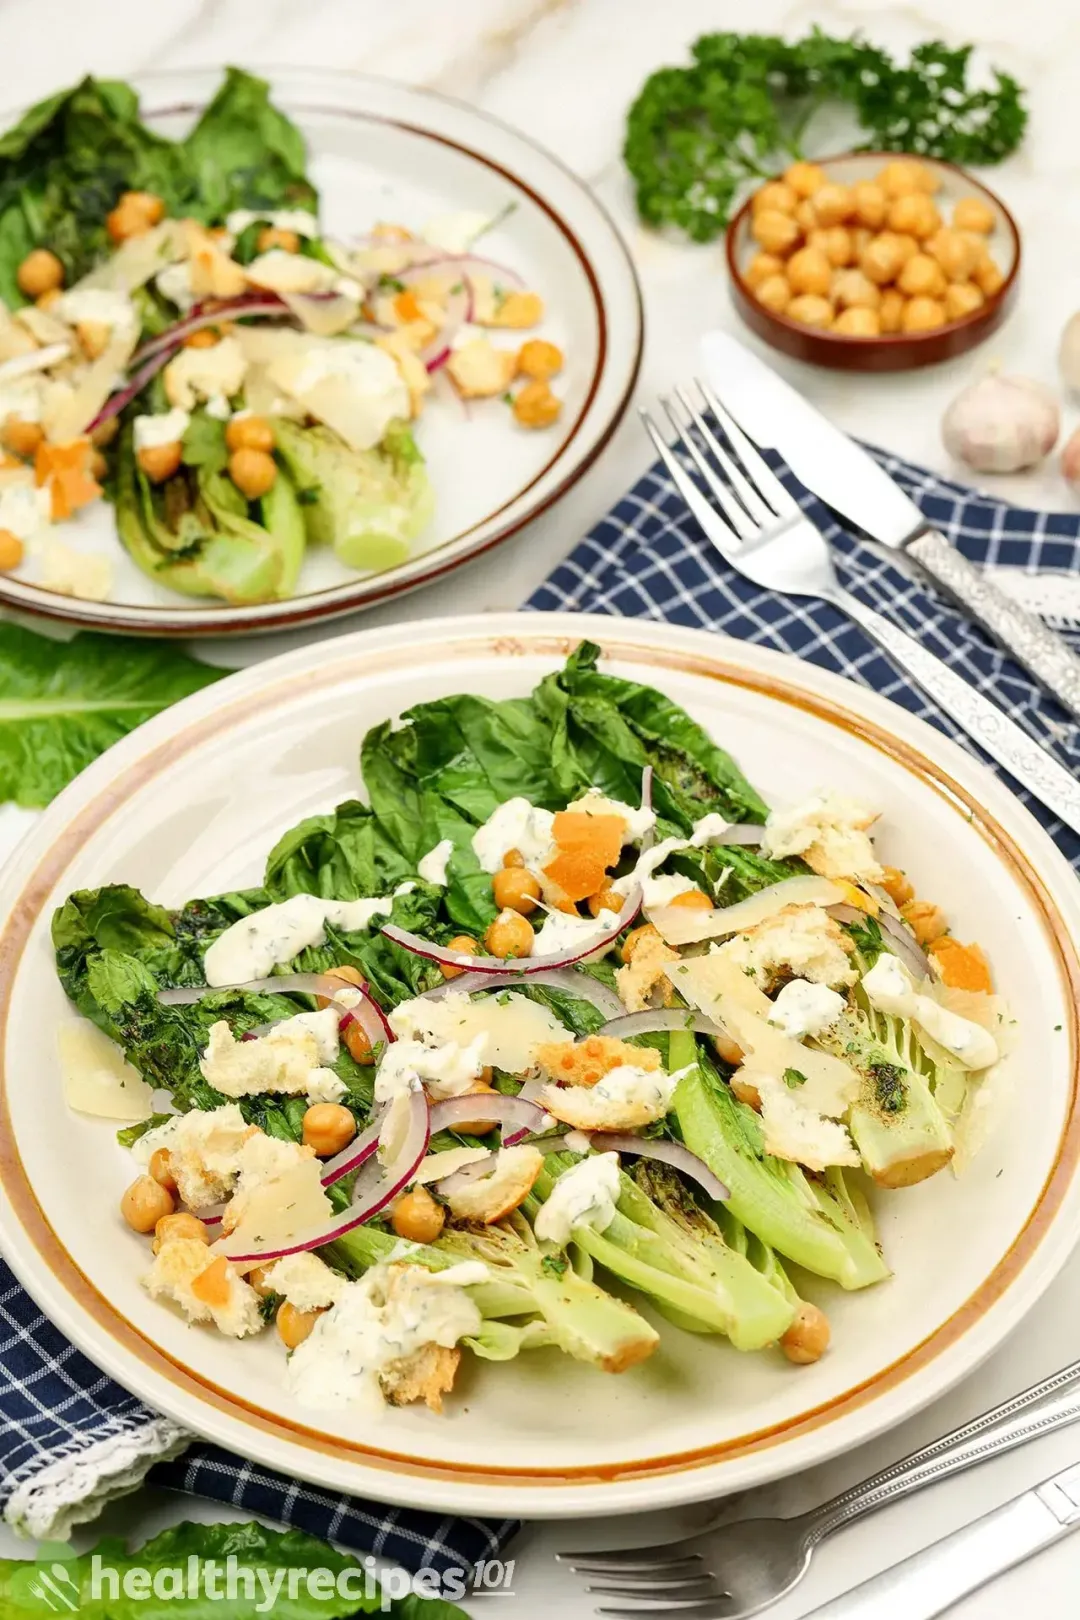 How to Store Leftovers Grilled Romaine salad